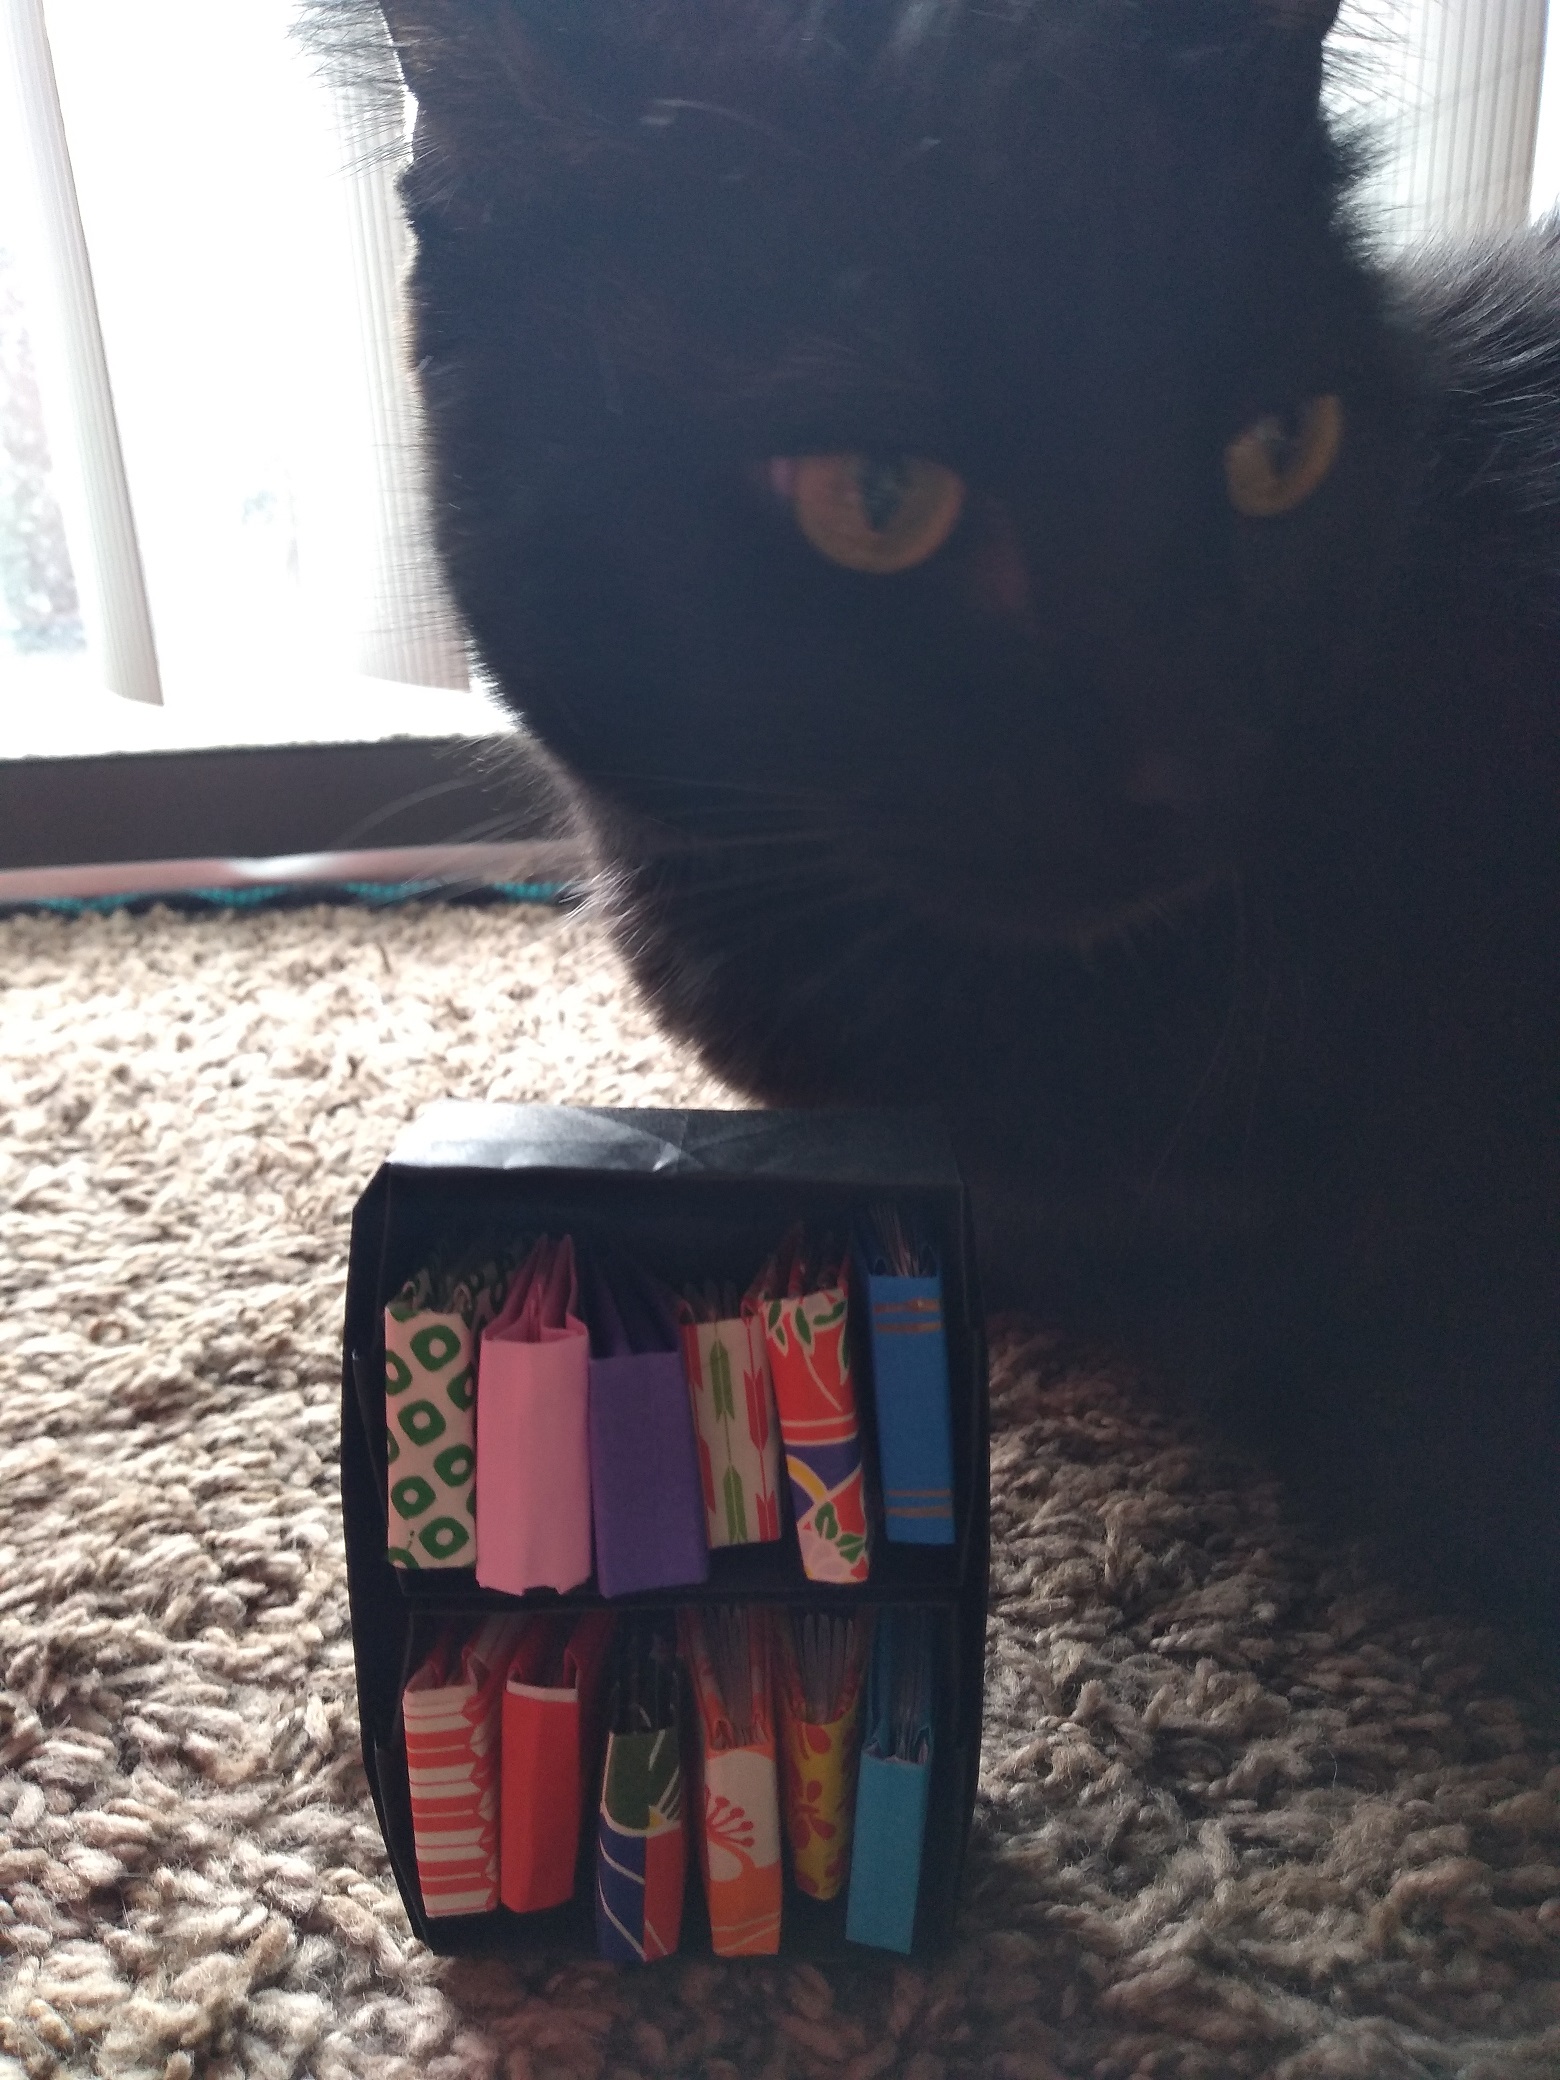 An origami bookshelf with tiny origami books on it in front of a black cat.